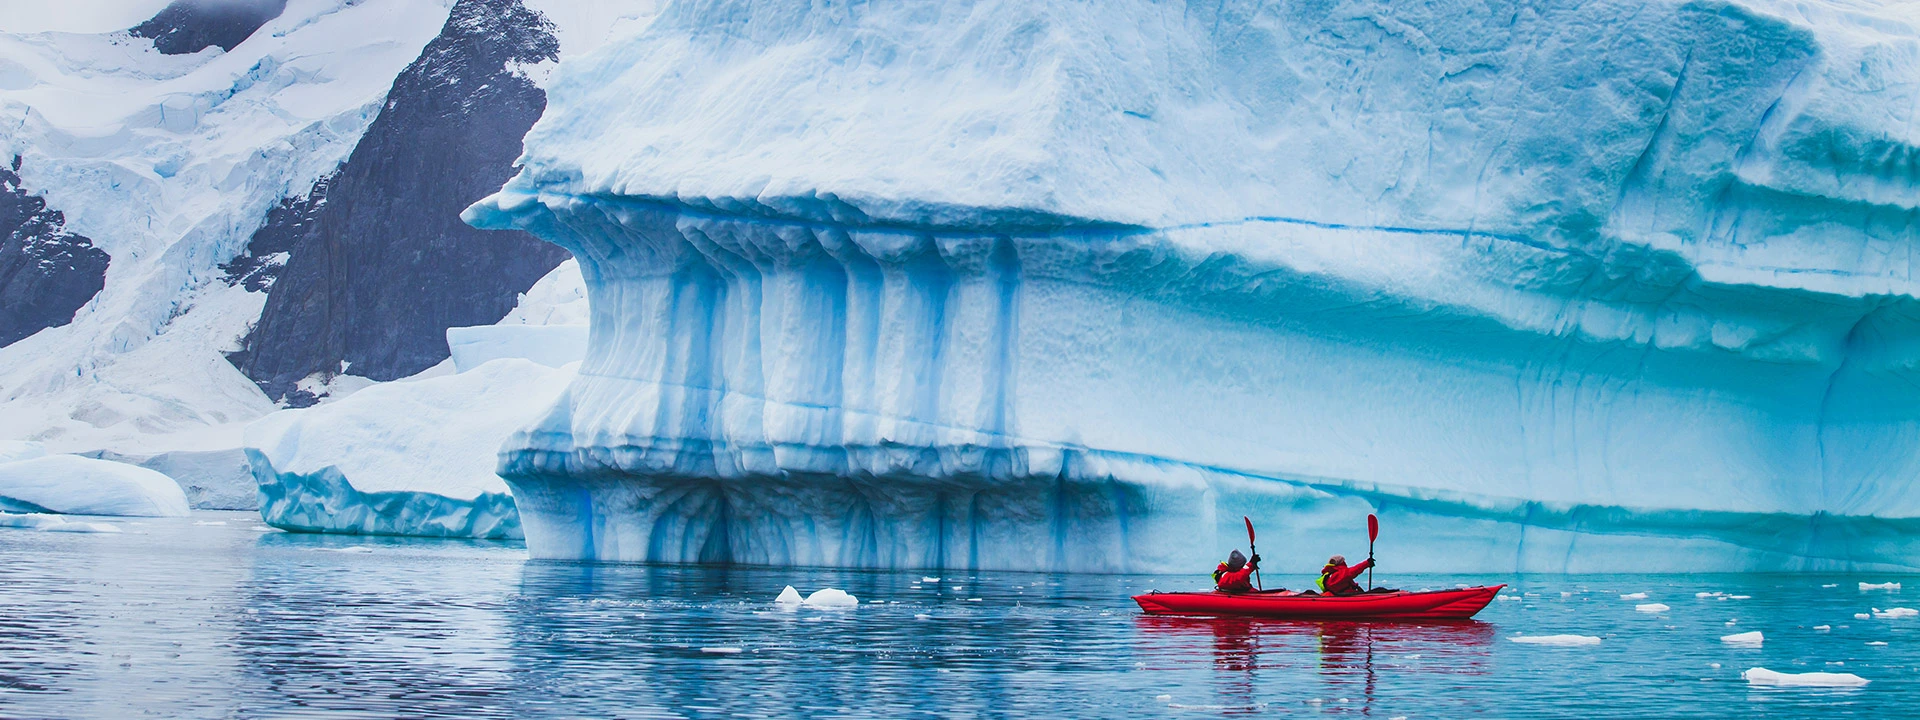 kayaking through the ice fjords on an Antarctica cruise